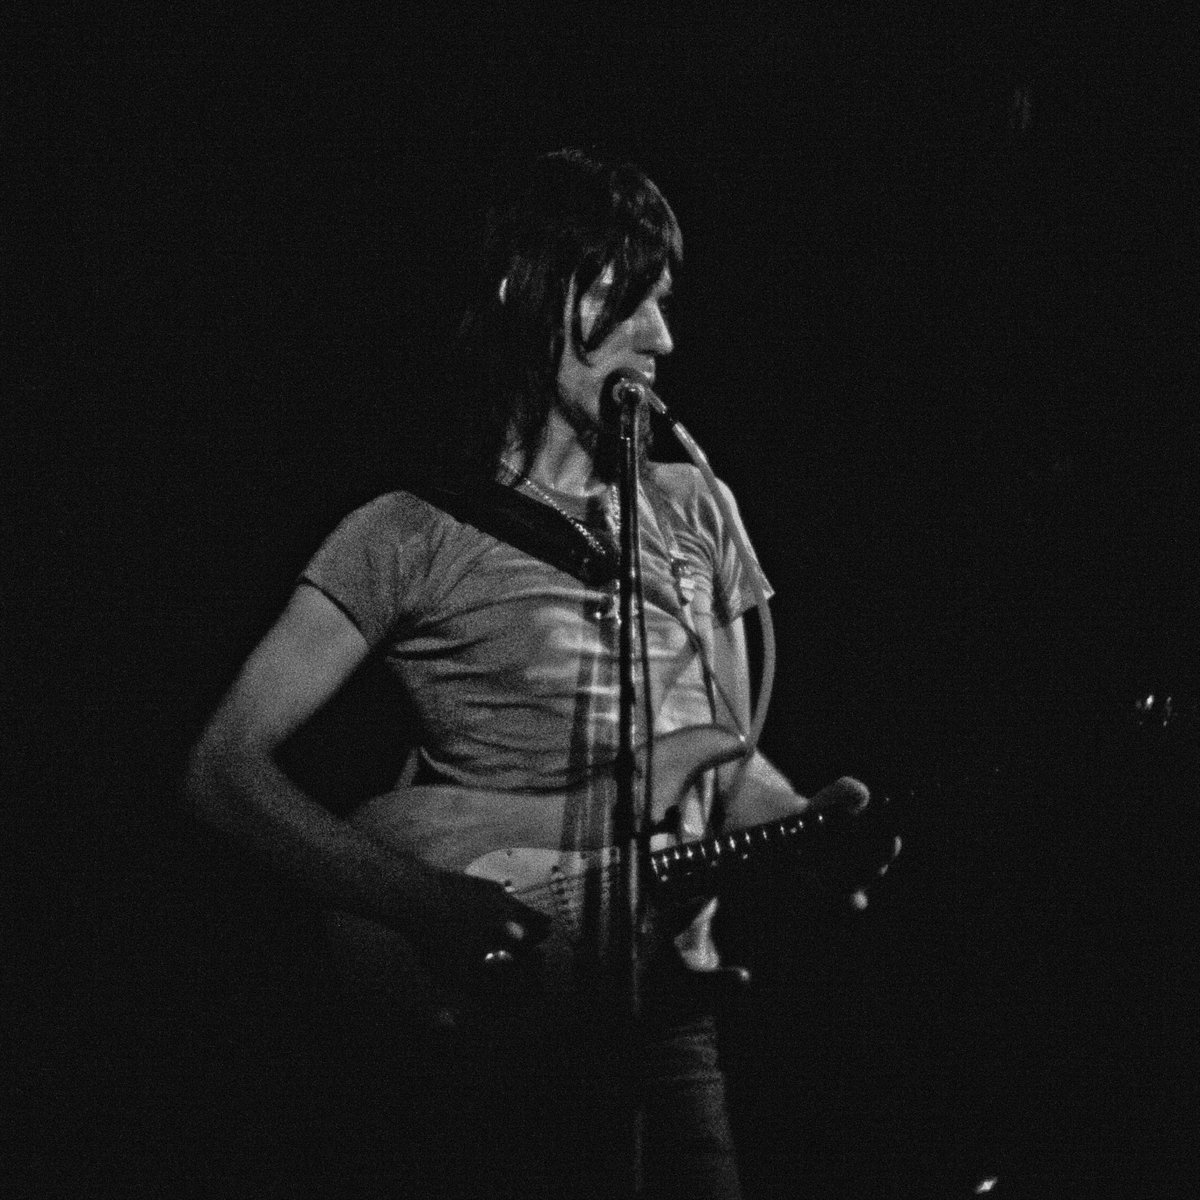 Losing Jeff Beck today is just a crummy way for 2023 to start. There will never be another like him. I took this photo in '75 in San Antonio. He's using a talk box on his version of the Beatles 'She's a Woman'. R.I.P. Mr. Beck